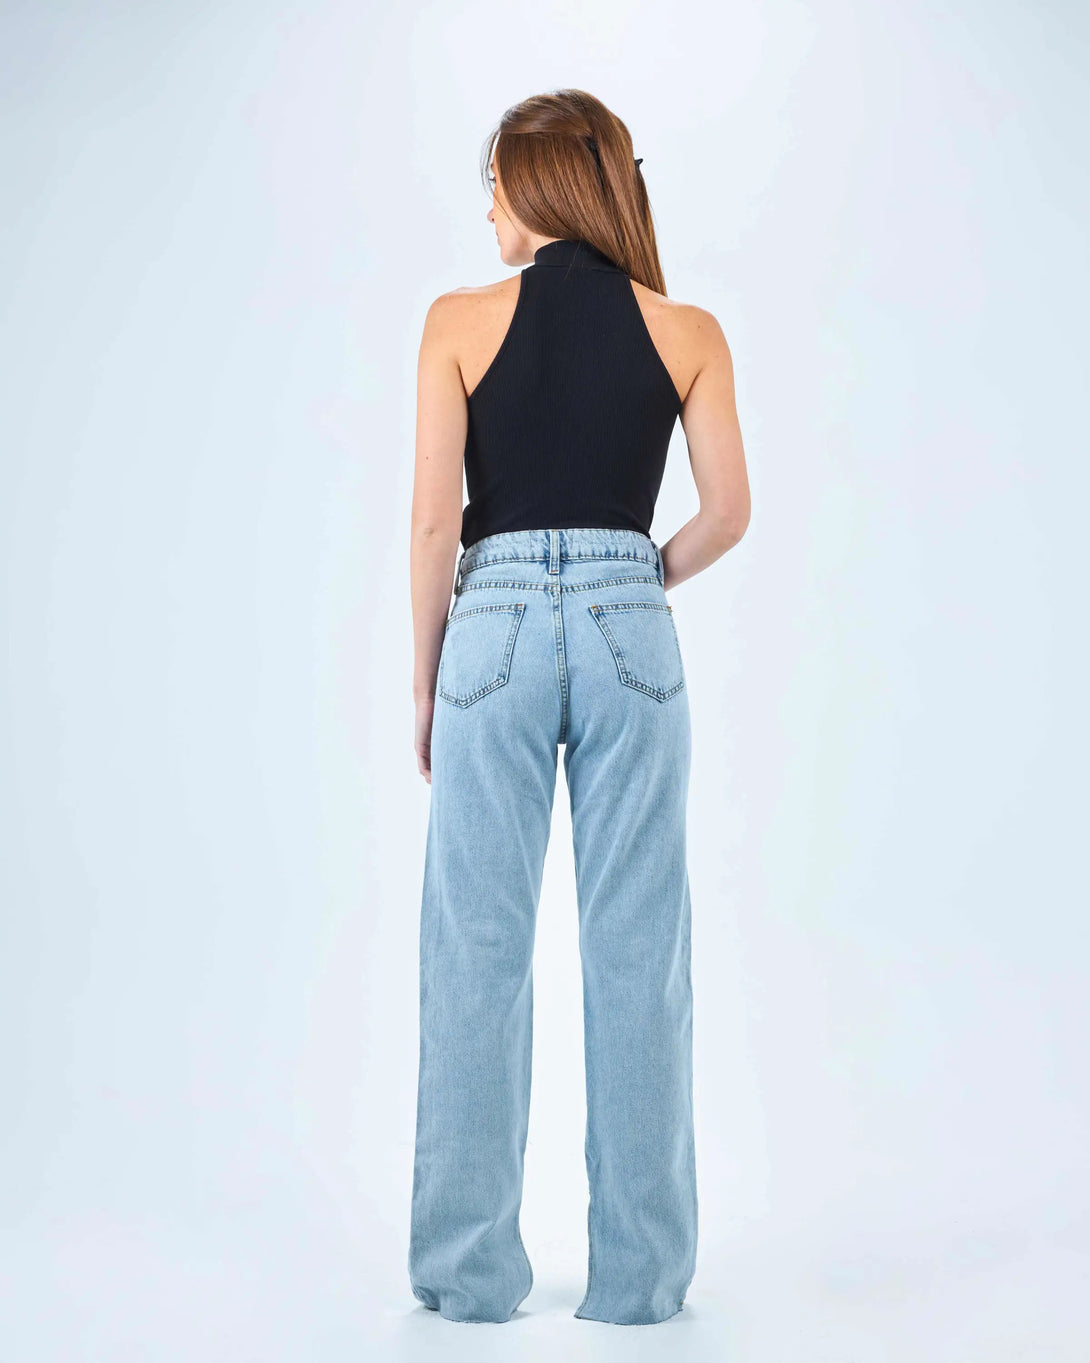 High Waist Light Washed With Side Split Wide Leg Jeans.